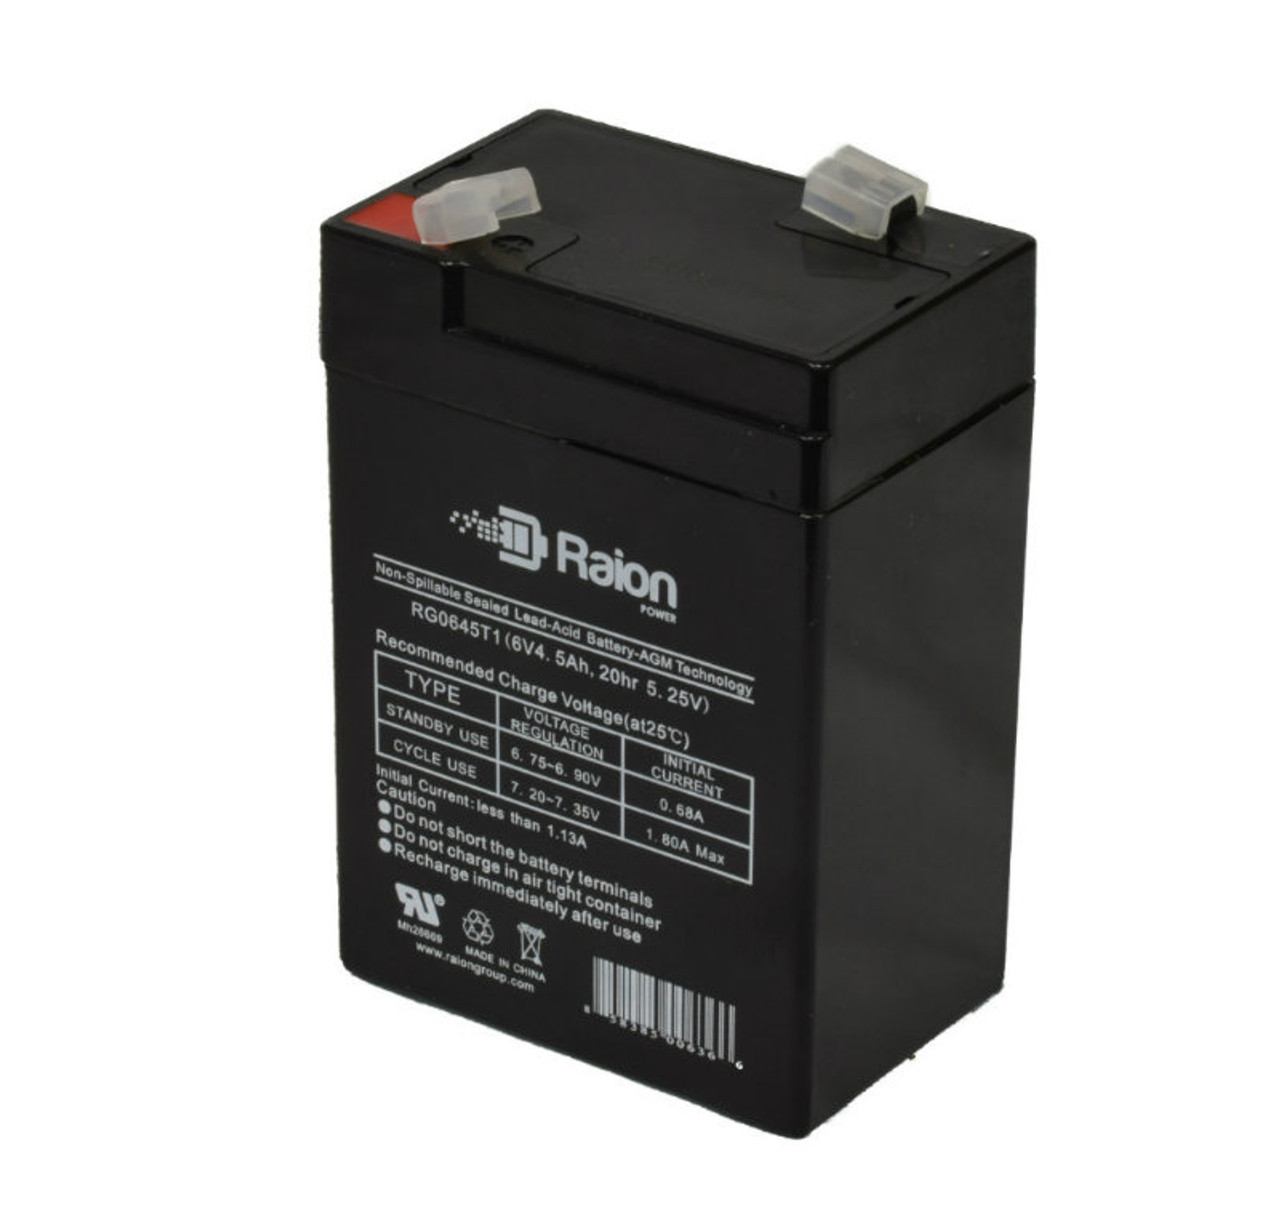 Raion Power RG0645T1 6V 4.5Ah Replacement Battery Cartridge for MHB MS4.5-6A